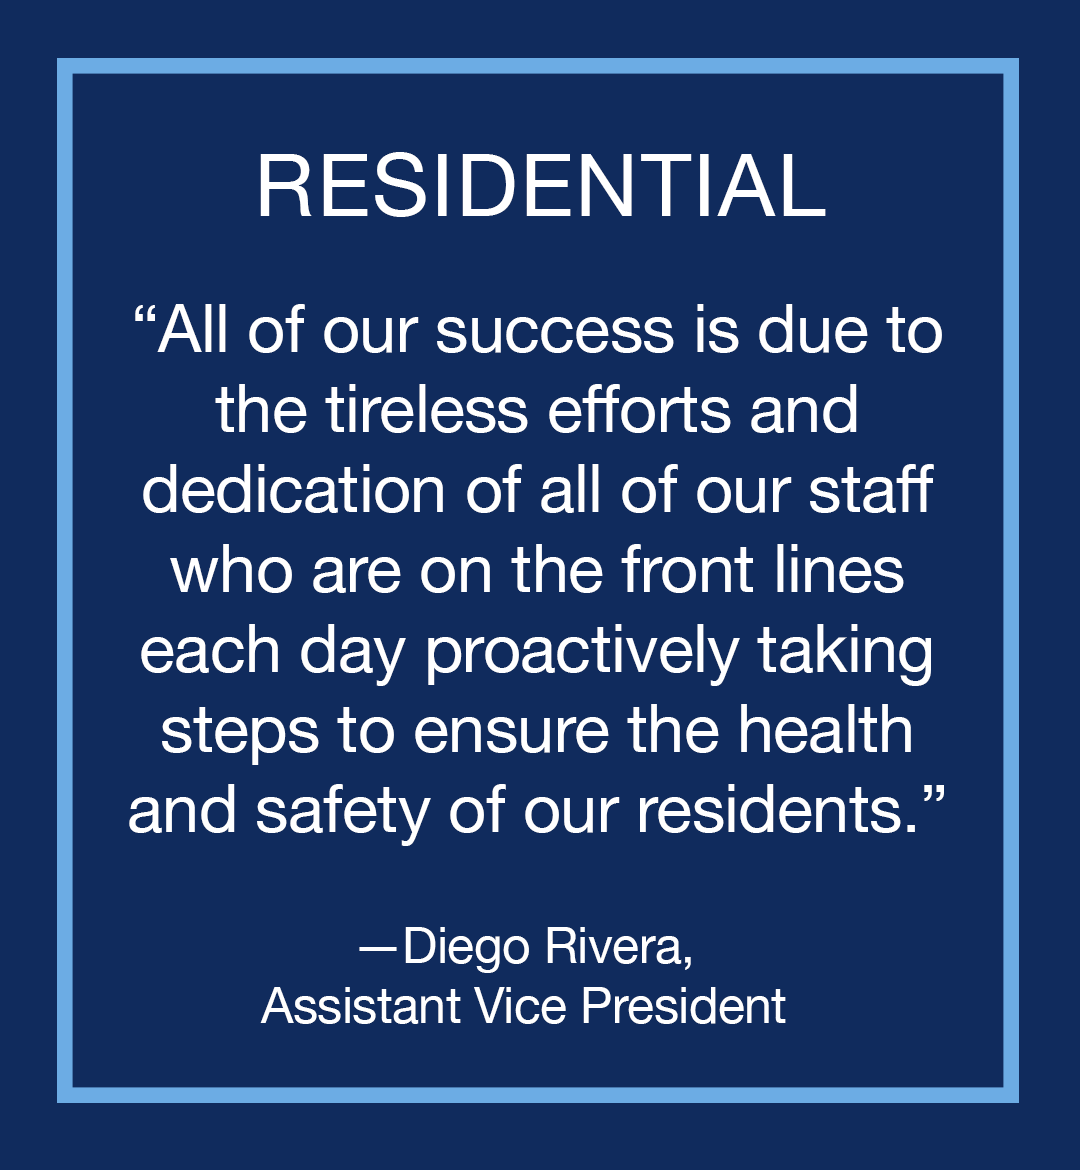 Image with text: Residential, "All of our success is due to the tireless efforts and dedication of all of our staff who are on the front lines each day proactively taking steps to ensure the health and safety of our residents," Diego Rivera, Assistant Vice President.